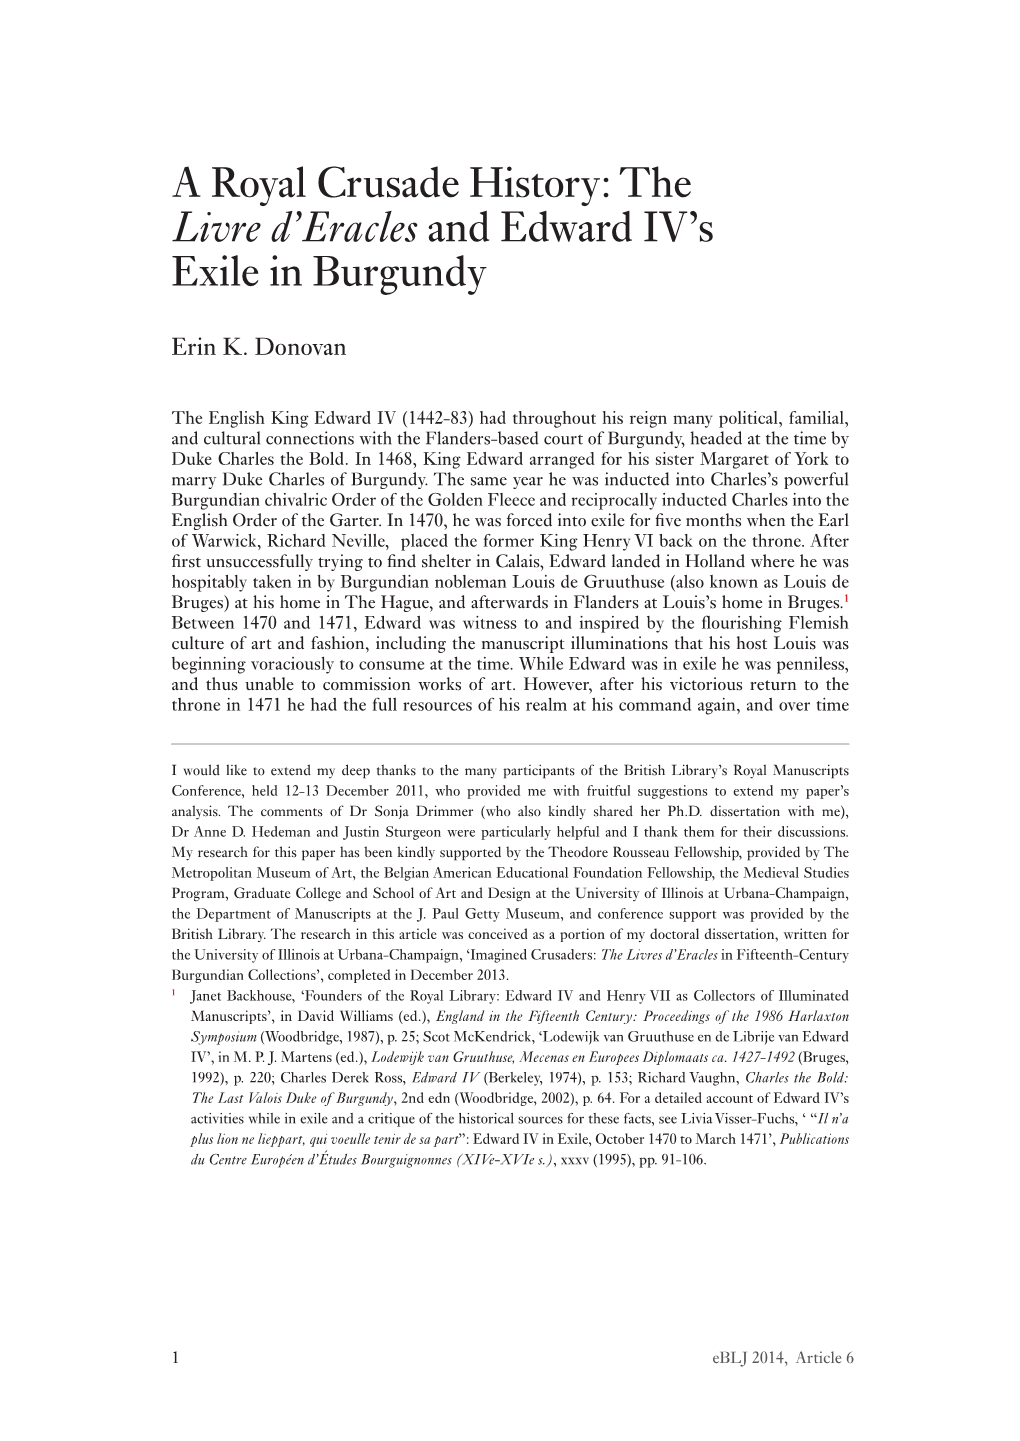 A Royal Crusade History: the Livre D'eracles and Edward IV's Exile In